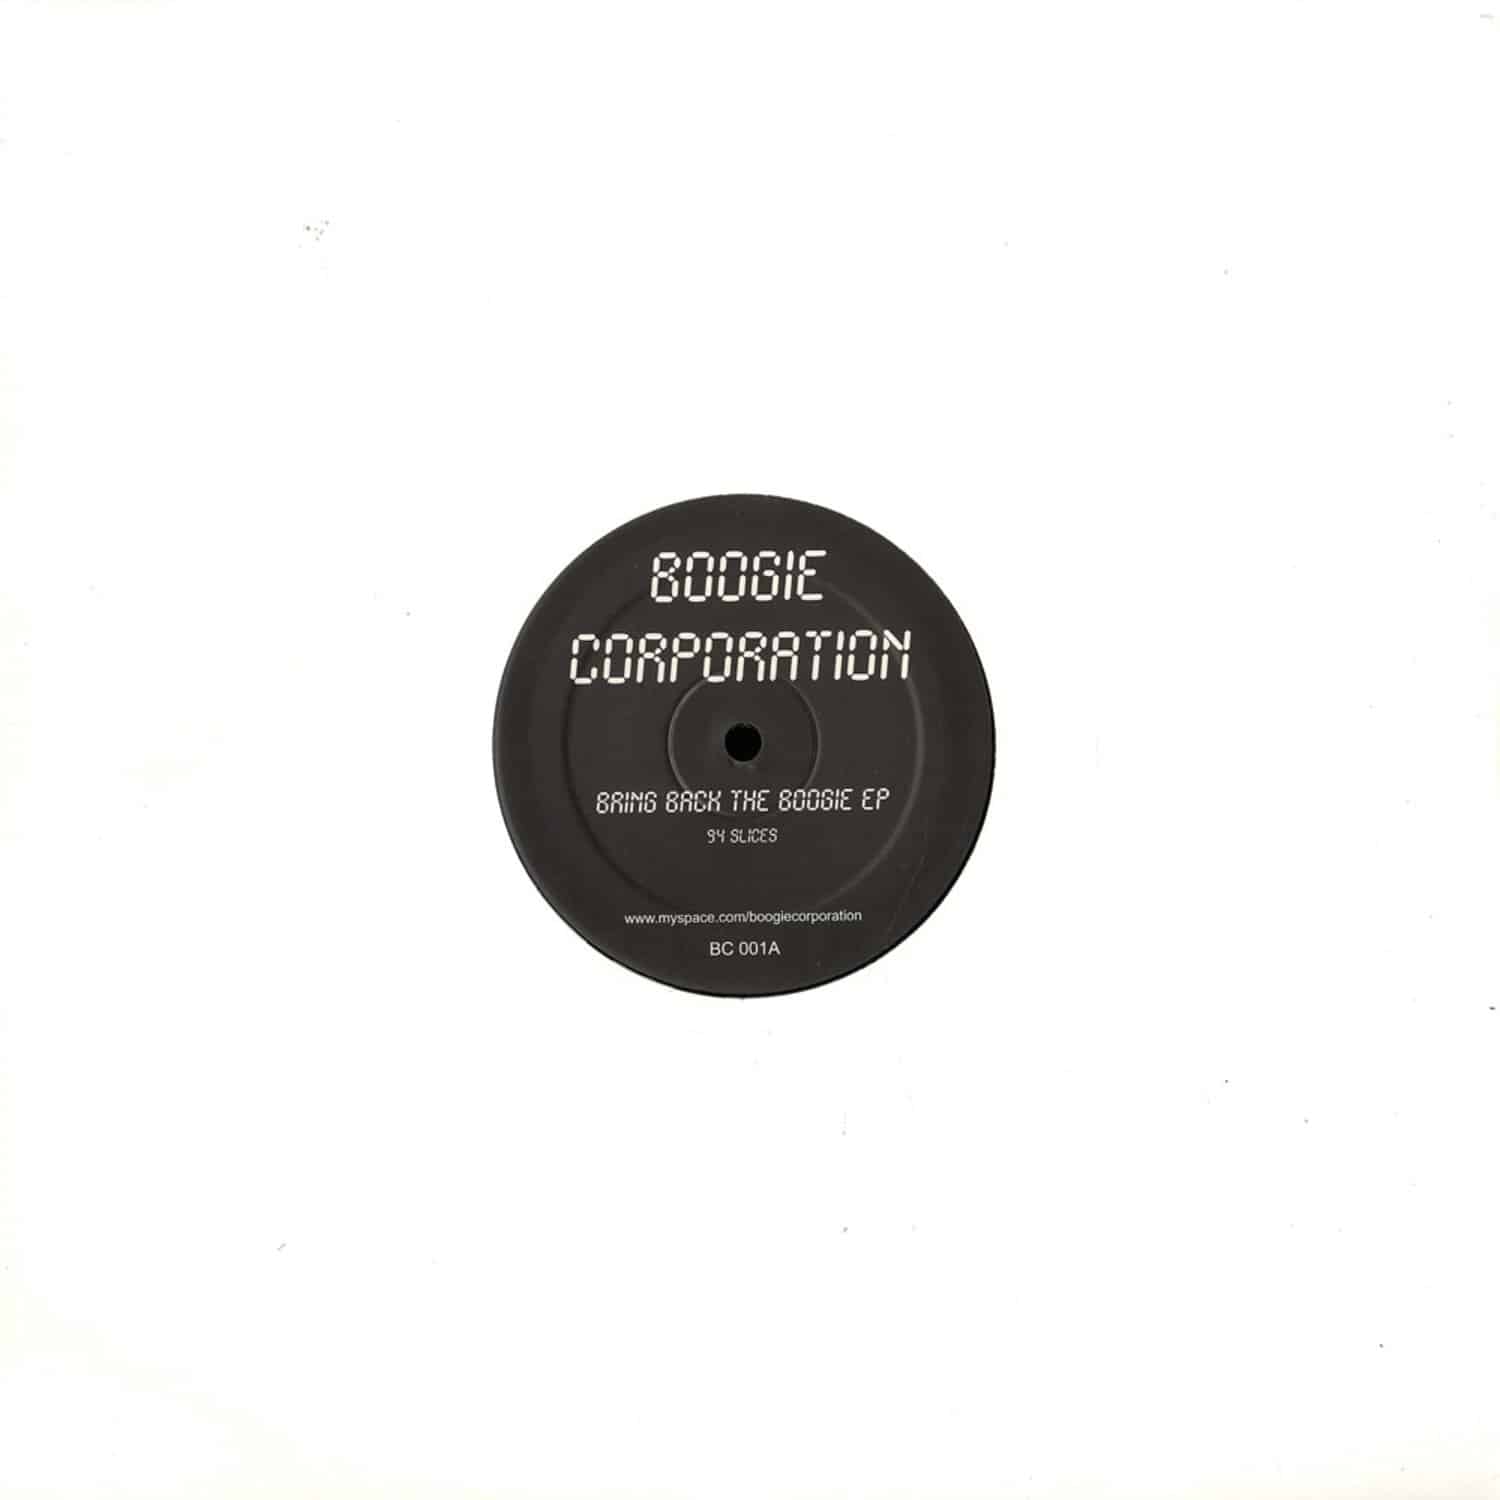 Boogie Corporation - BRING BACK THE BOGGIE EP